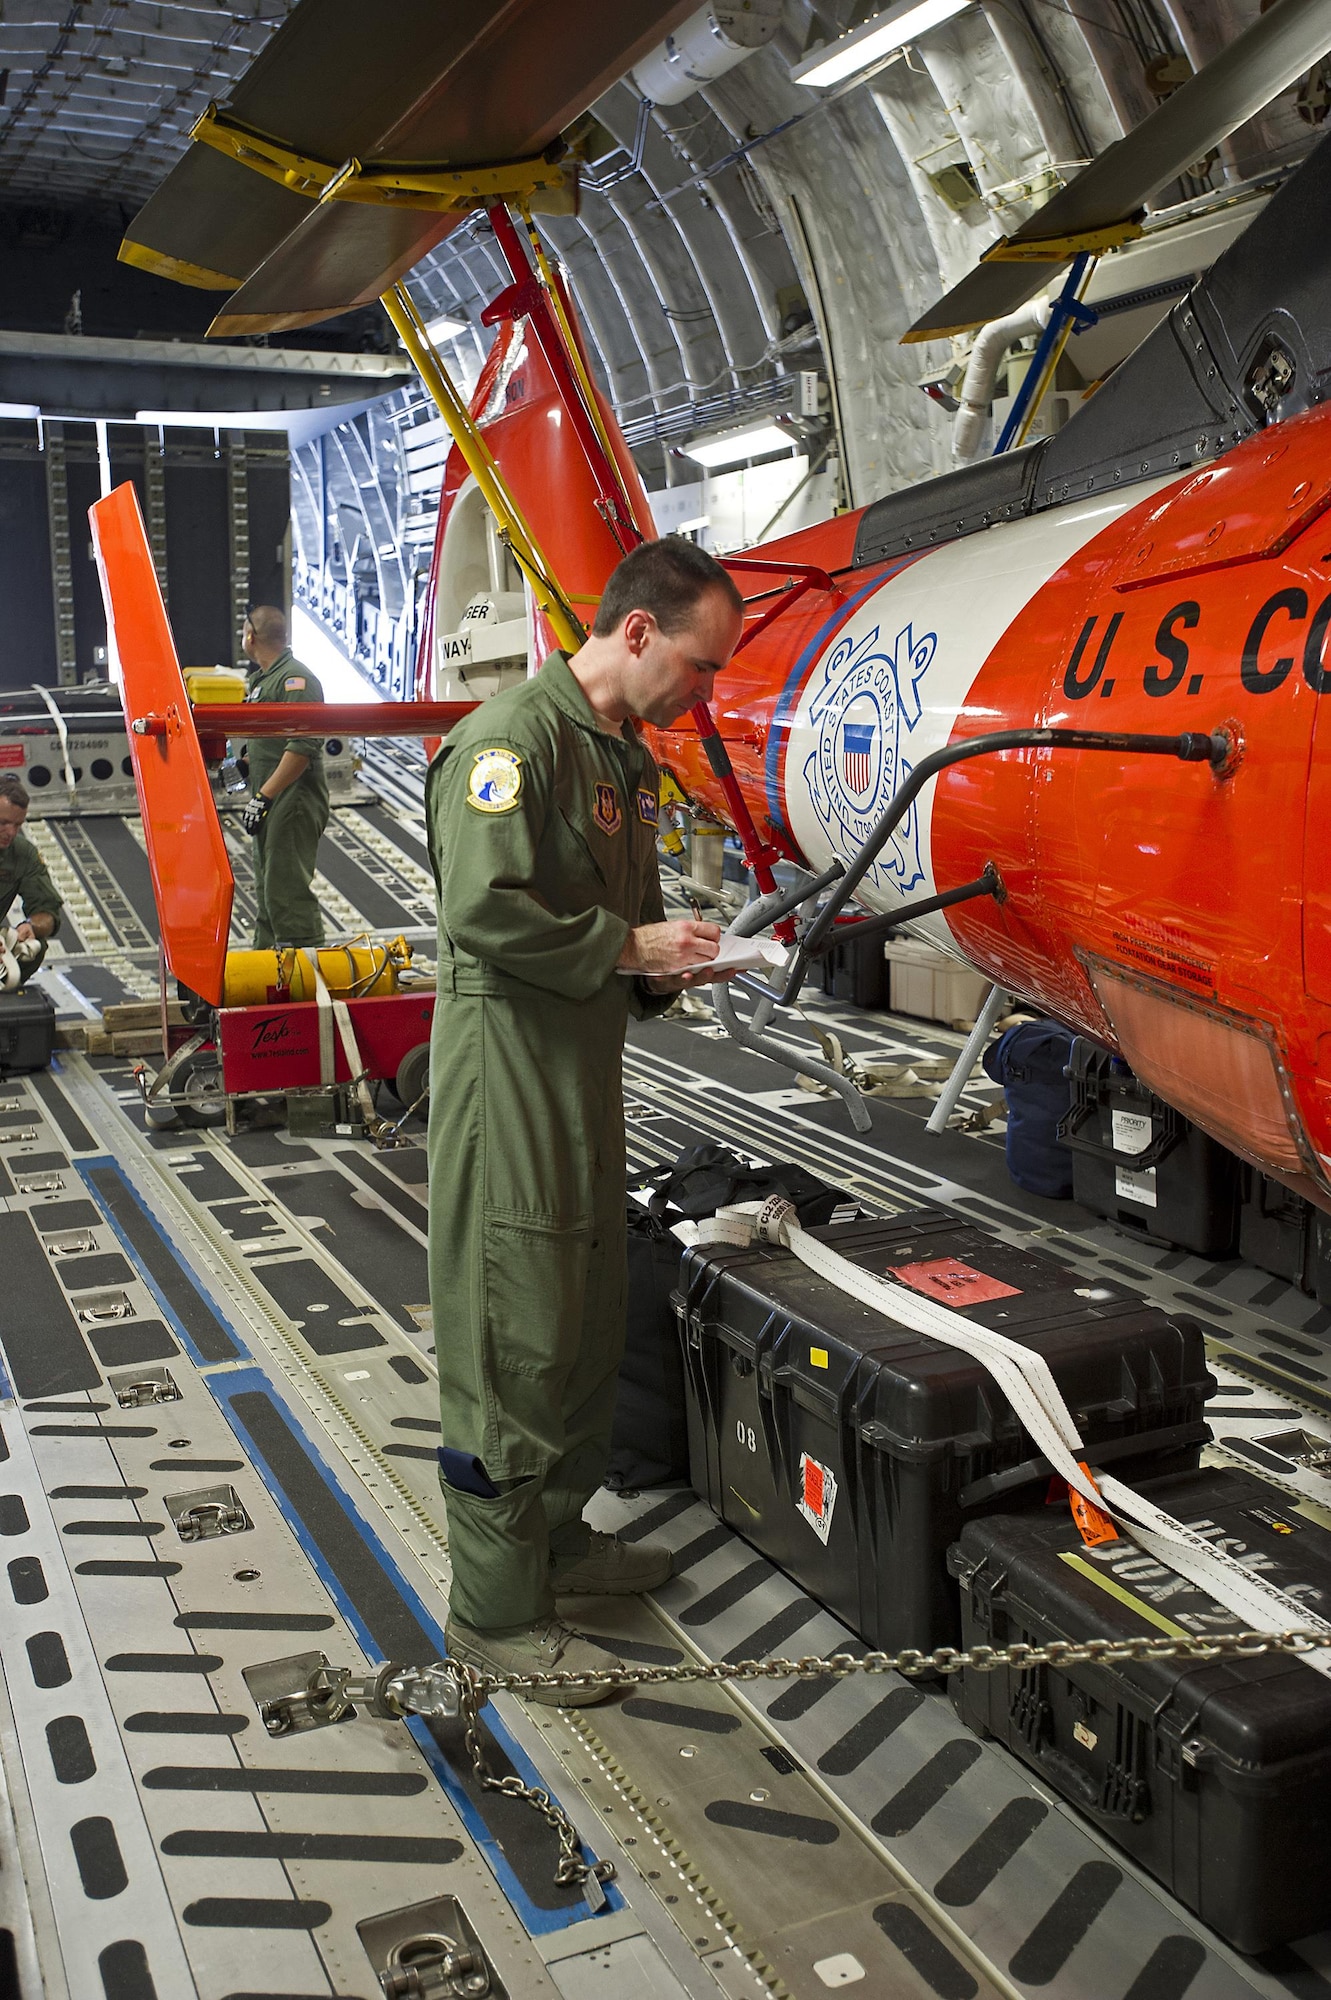 Tech. Sgt. Michael Smith, a loadmasters assigned to the 300th Airlift Squadron, Joint Base Charleston, South Carolina, conducts pre-flight checklists of the cargo, a U.S. Coast Guard MH-65 Dolphin helicopte, prior to departure. Reservists assigned to the 300 AS assisted the U.S. Coast Guard with transporting several MH-65 Dolphin helicopters and various supplies Feb. 5-7, 2016. (U.S. Air Force photo by SSgt. Bobby Pilch)